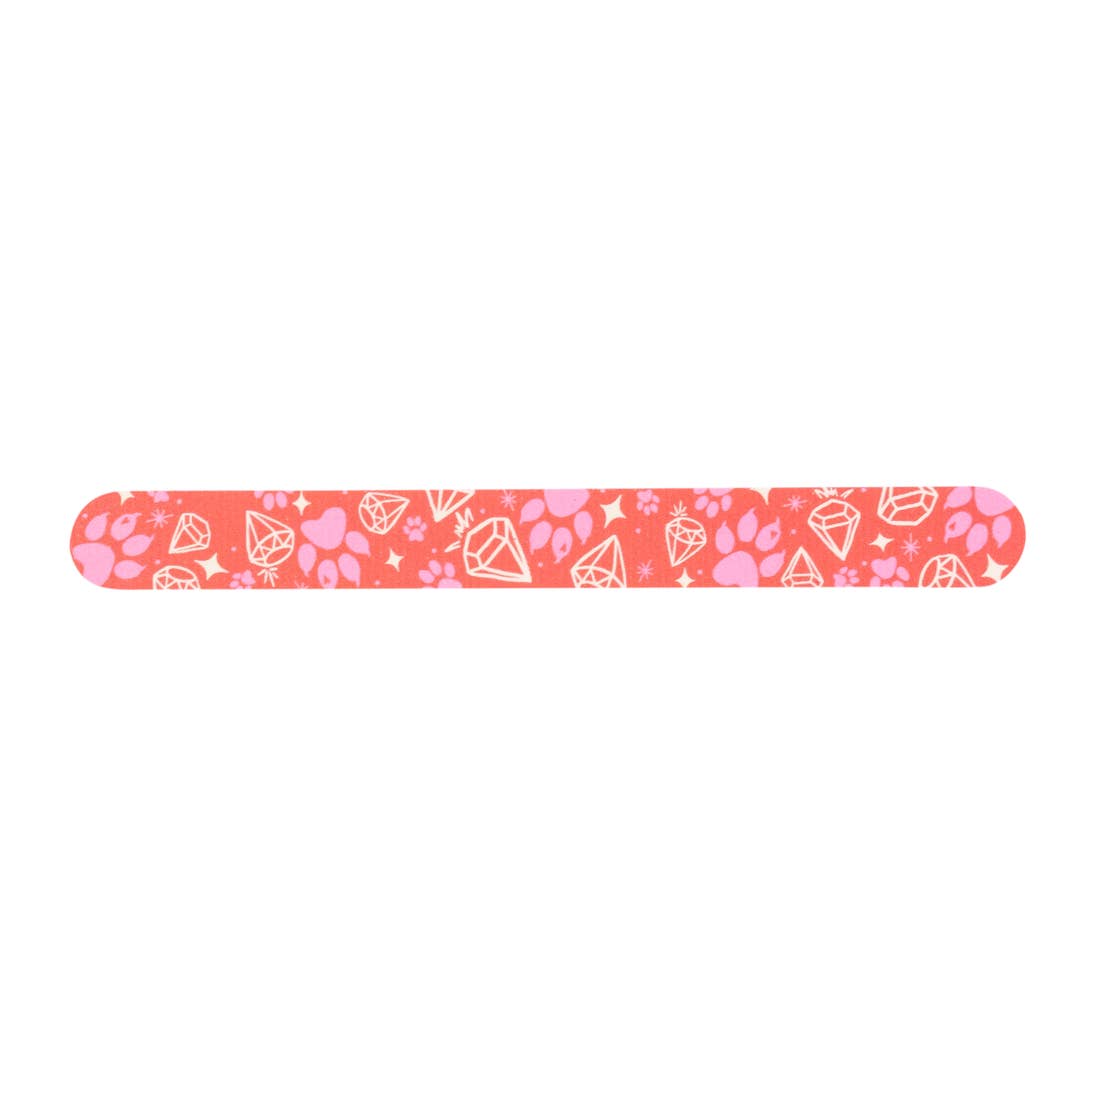 Dogs Are A Girl's Best Friend Nail File